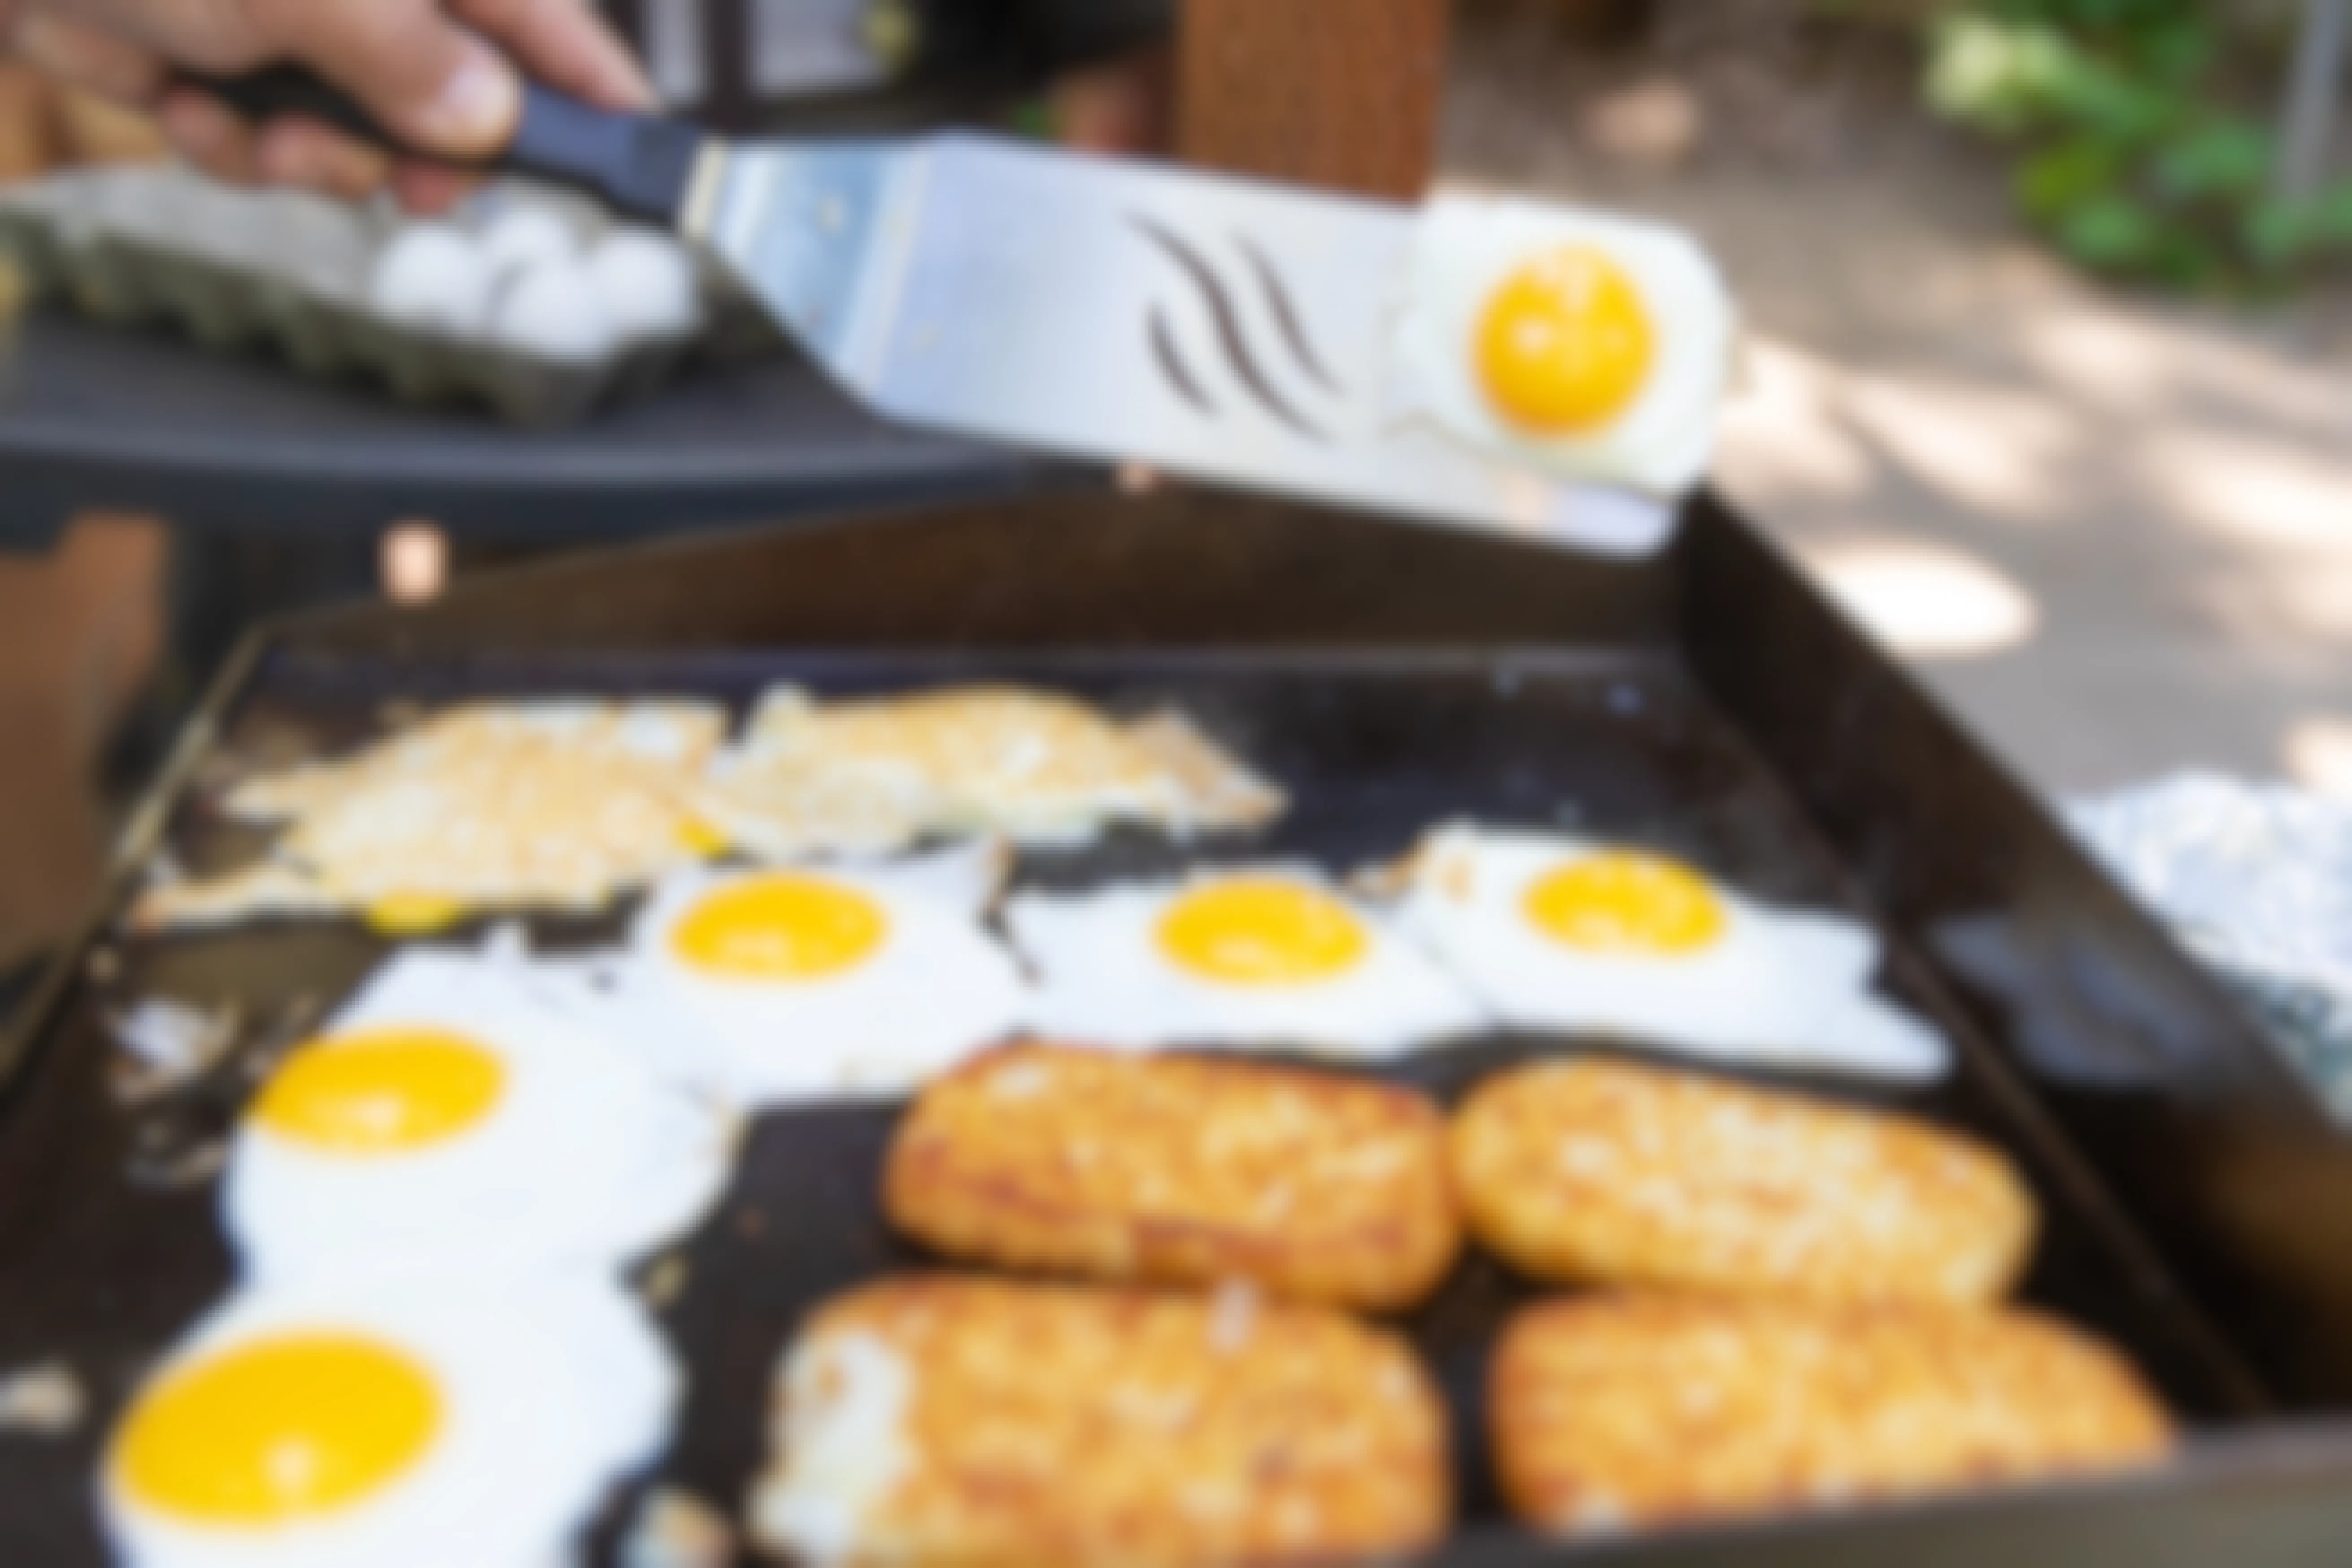 Eggs and hashbrowns are being cooked on a griddle. Someone is holding a spatula and flipping an egg.